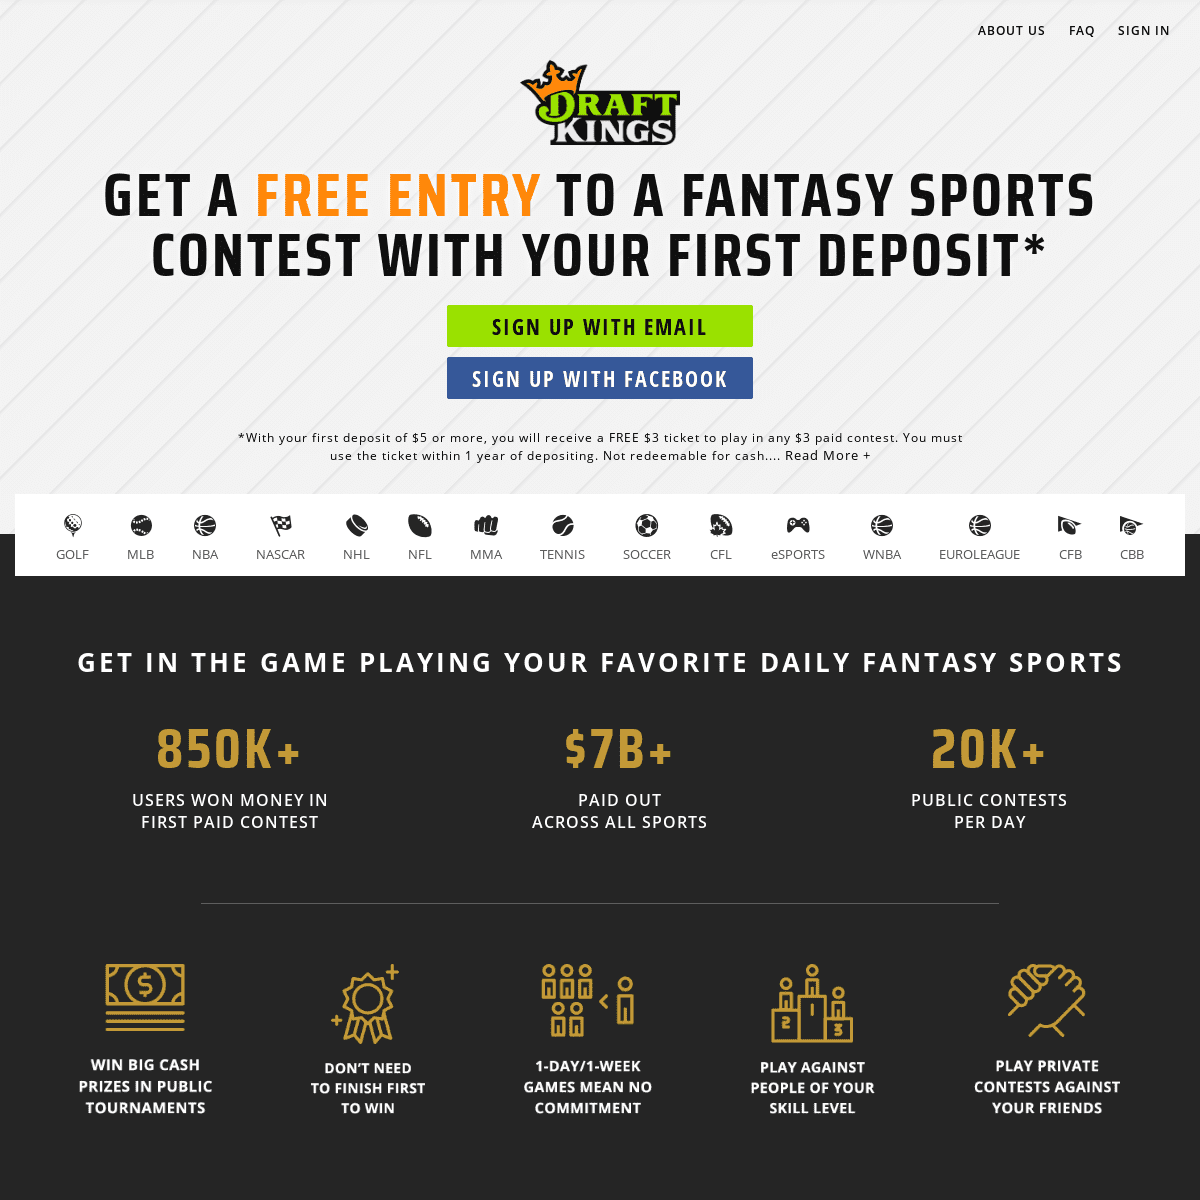 A complete backup of draftkings.co.uk